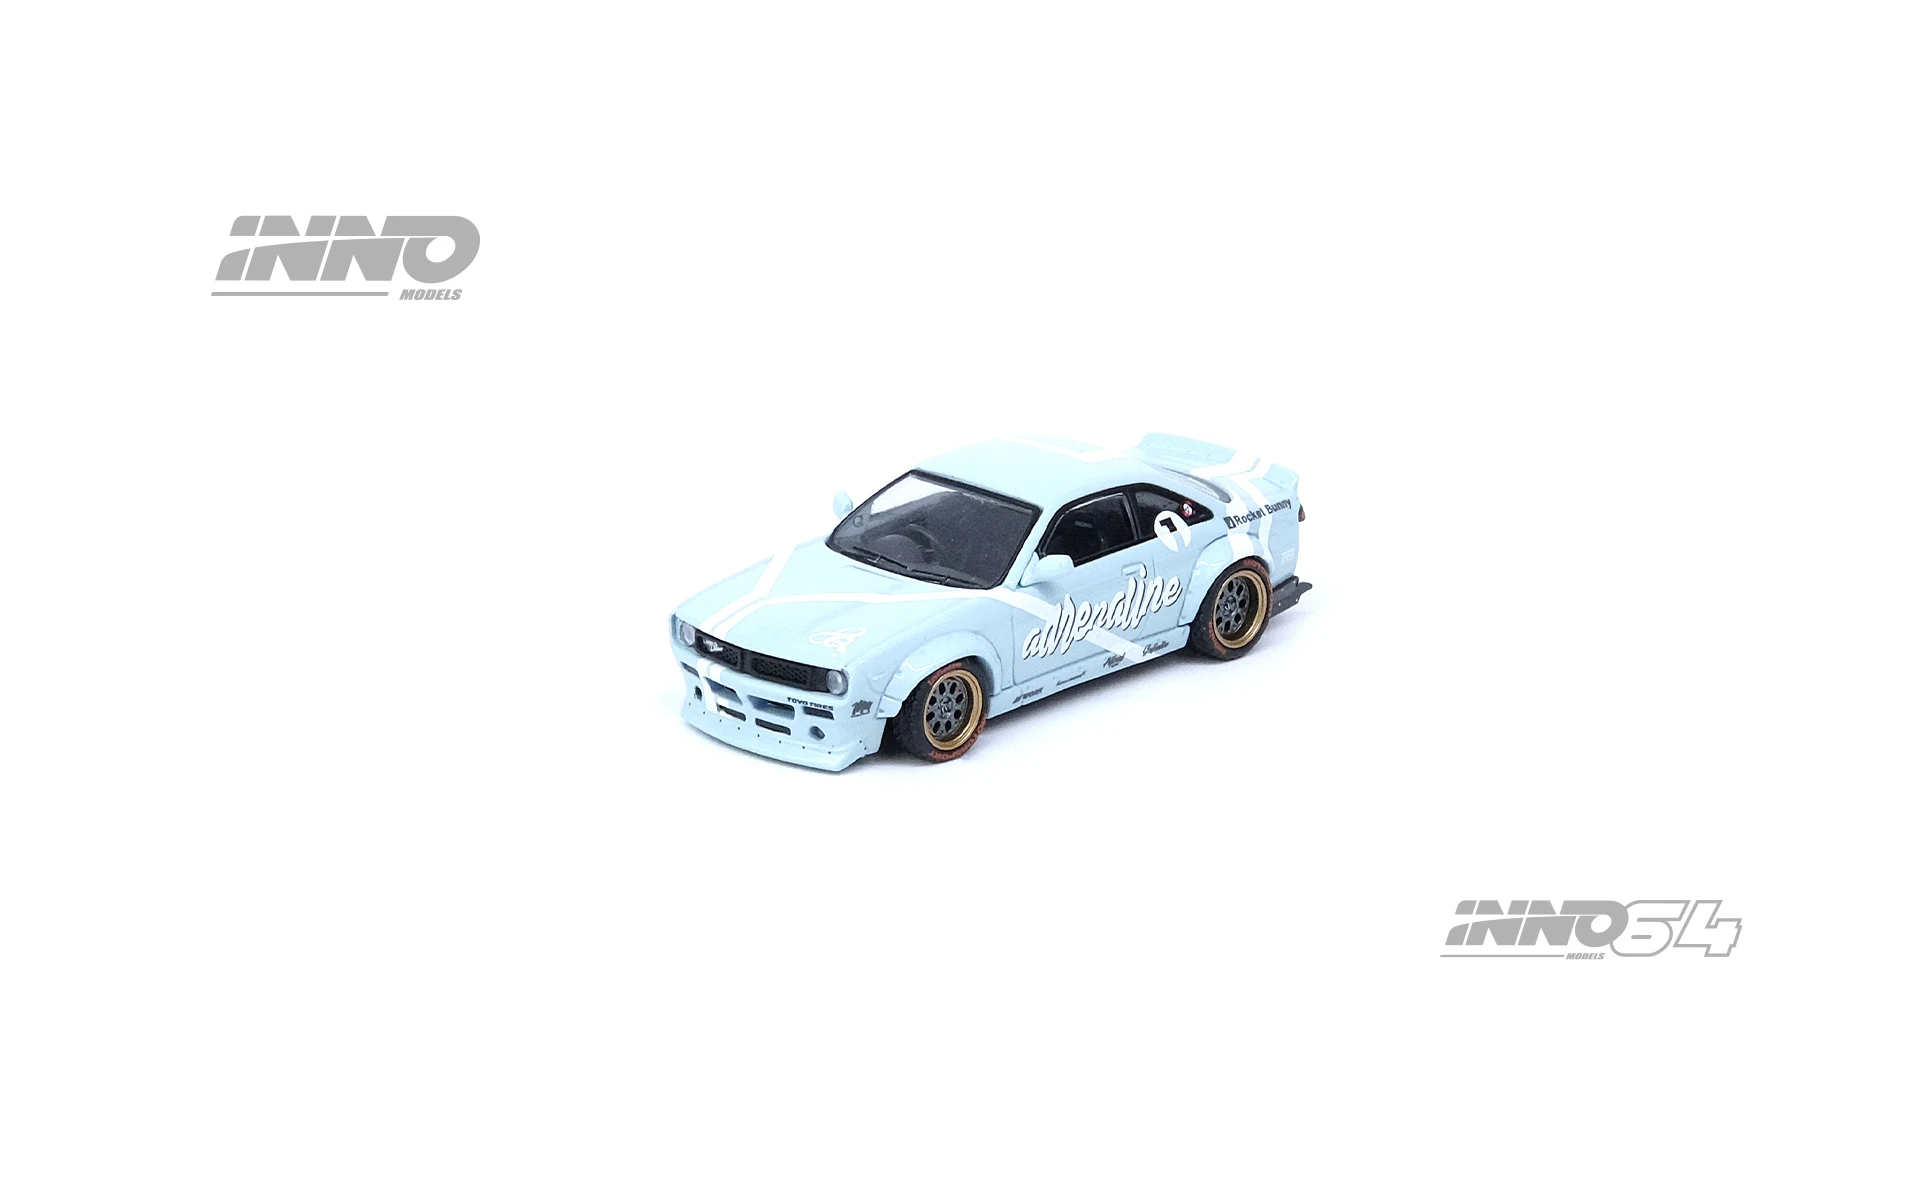 

INNO 1:64 NISSAN SILVIA S14 "ADRENALINE" Rocket Bunny Boss by Chapter One THAILAND Diecast Model Car